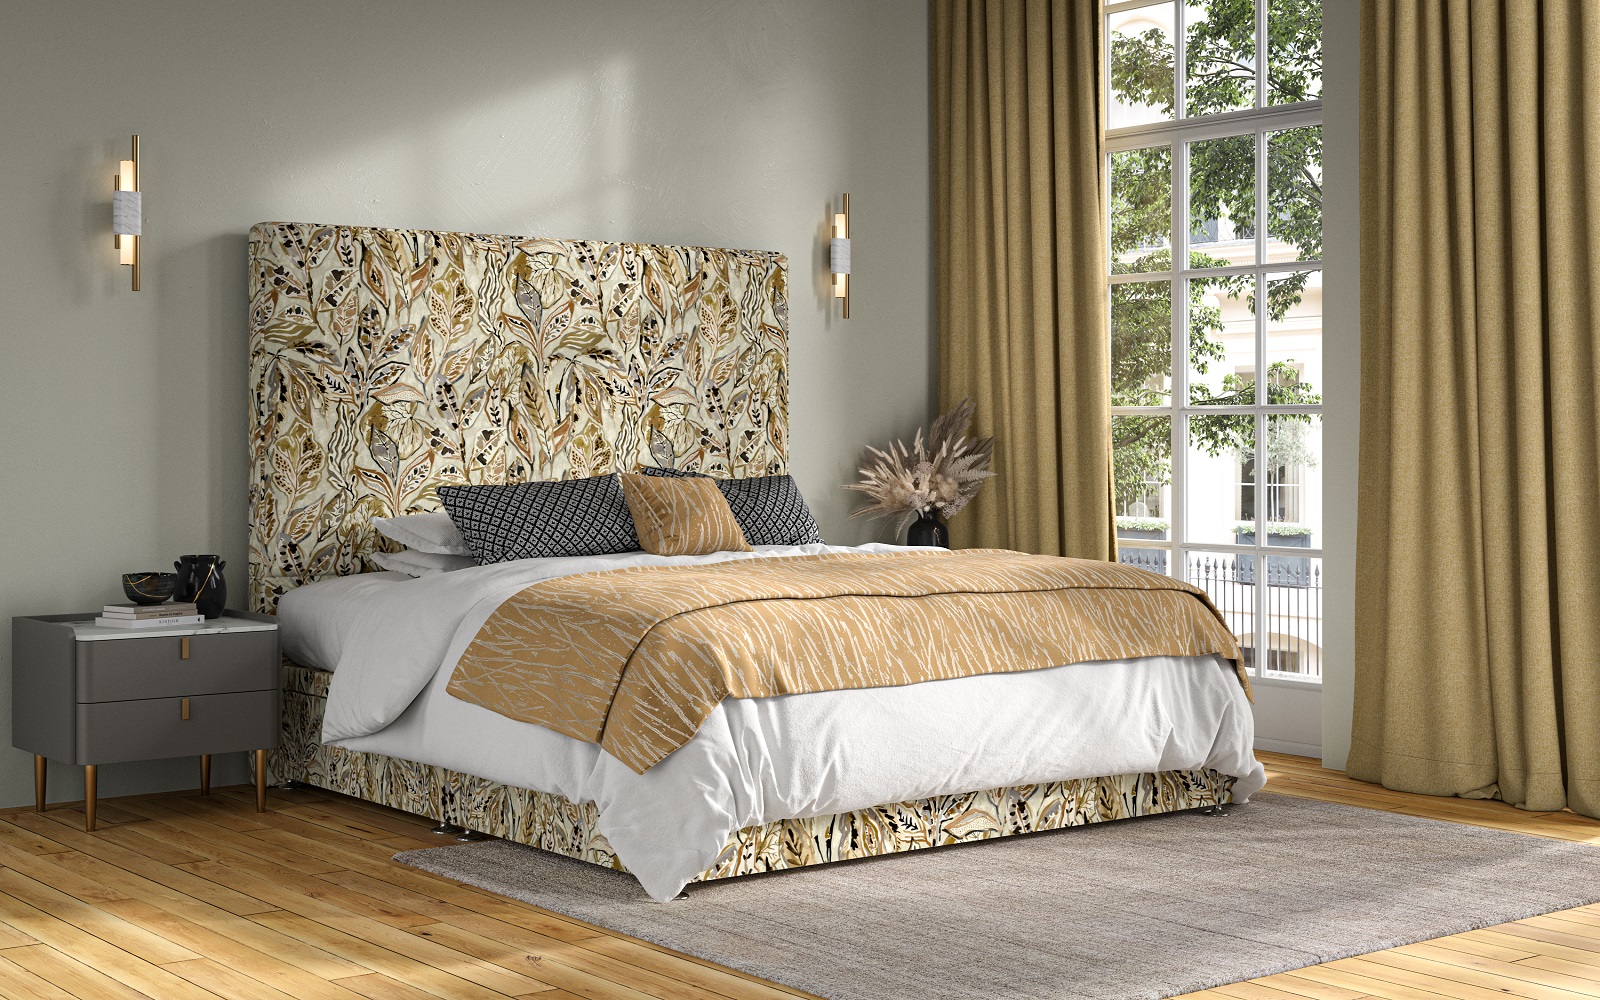 bedroom with sand coloured floor to ceiling curtains and a floral patterned headboard